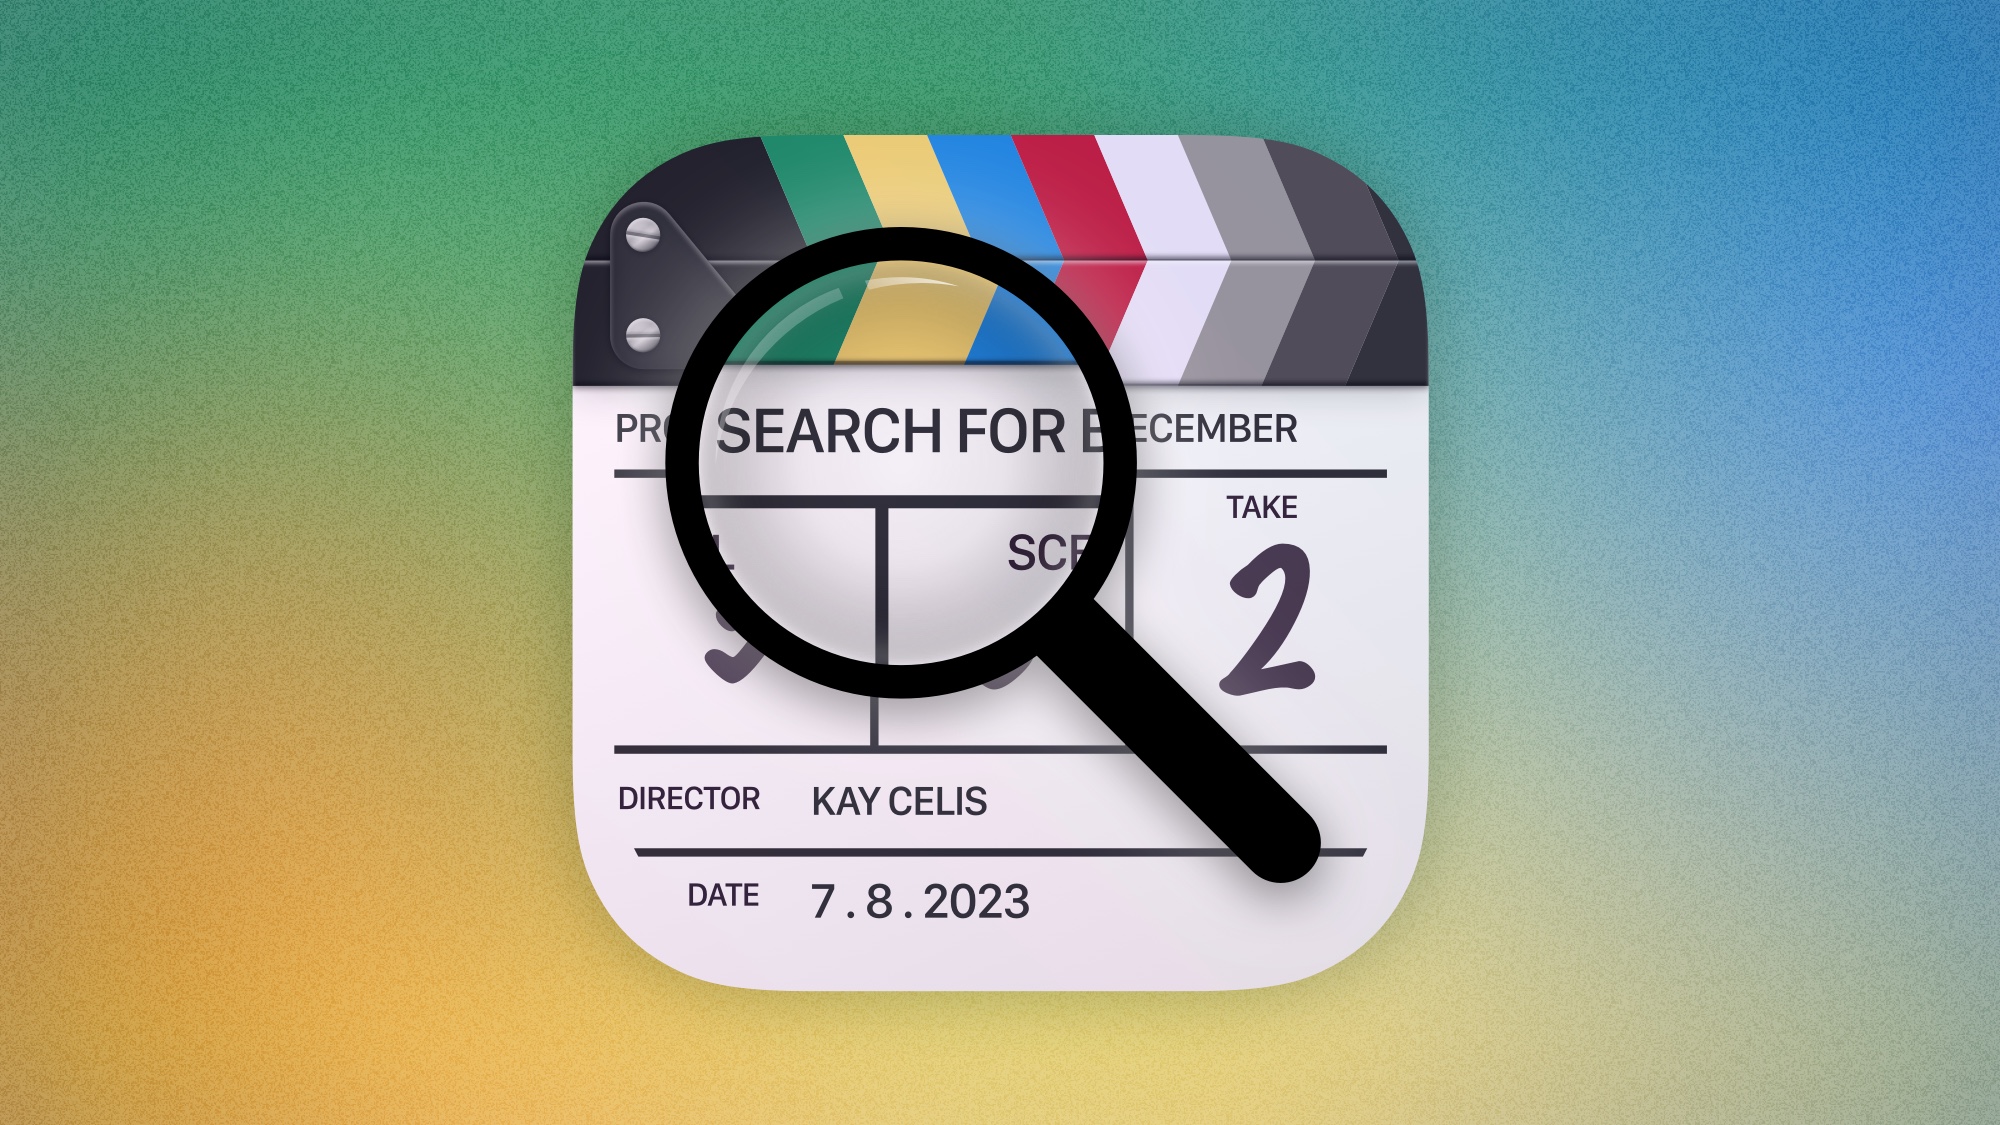 An app icon centred over a colourful background. It depicts a film slate with the clapper stick closed, and details about a fictional movie called "Search for Blue December", directed by Kay Celis. The production date is 7 August 2023, written in proper date/month/year notation. A magnifying glass hovers above the slate in the centre of the icon, magnifying the words "Search for" from the movie's title.